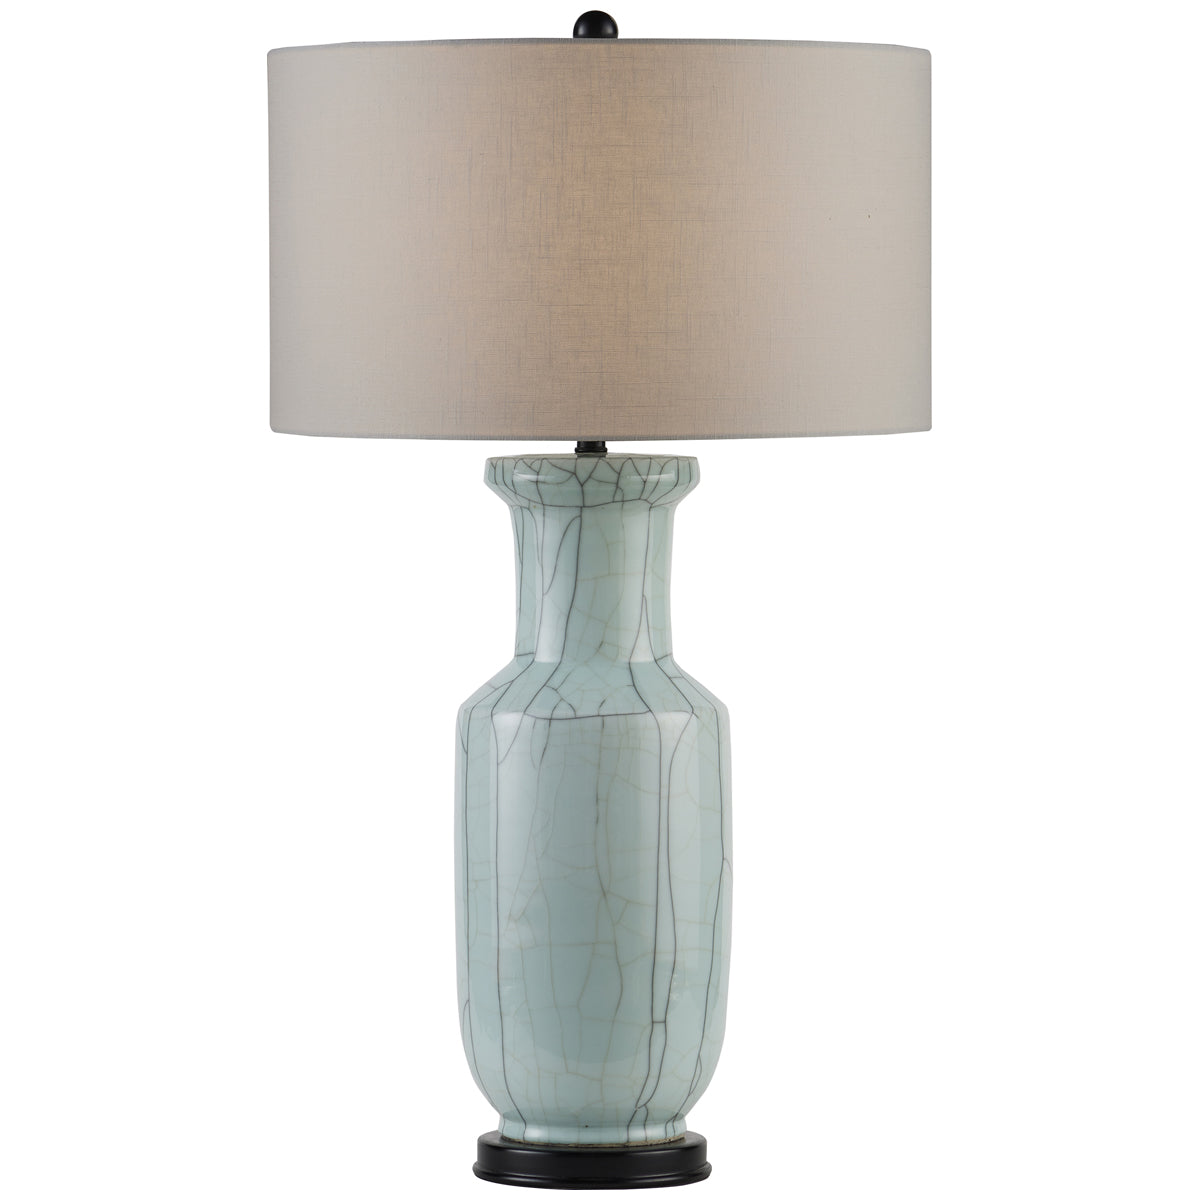 Currey and Company Willow Table Lamp